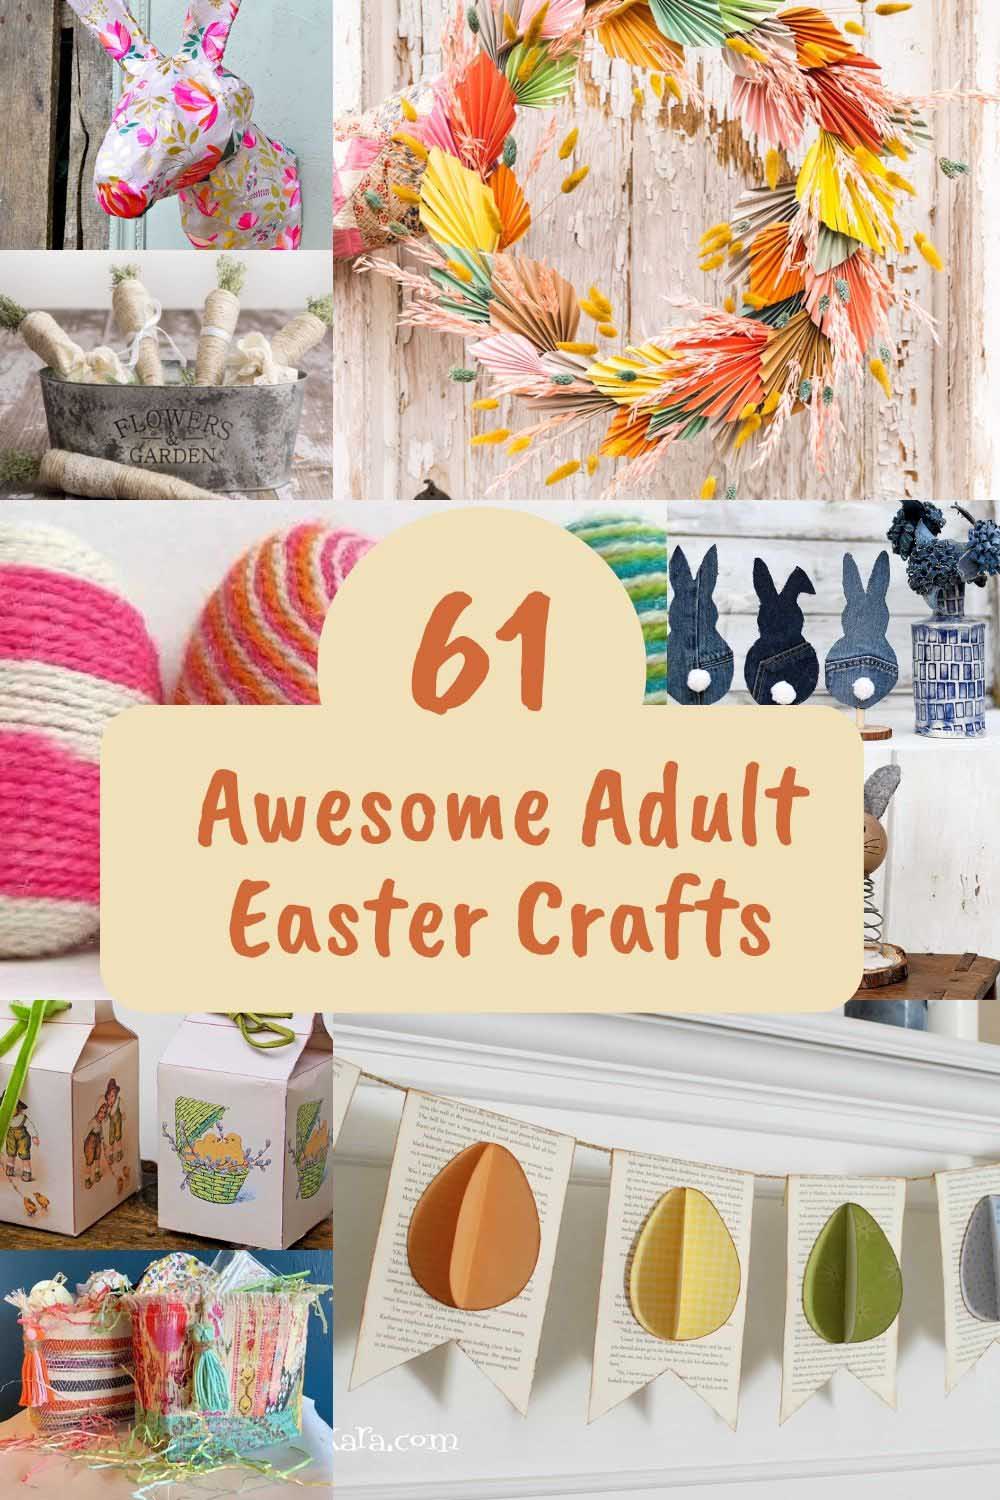 Adult Crafts: 40 Easy Art and Craft Ideas for Adults